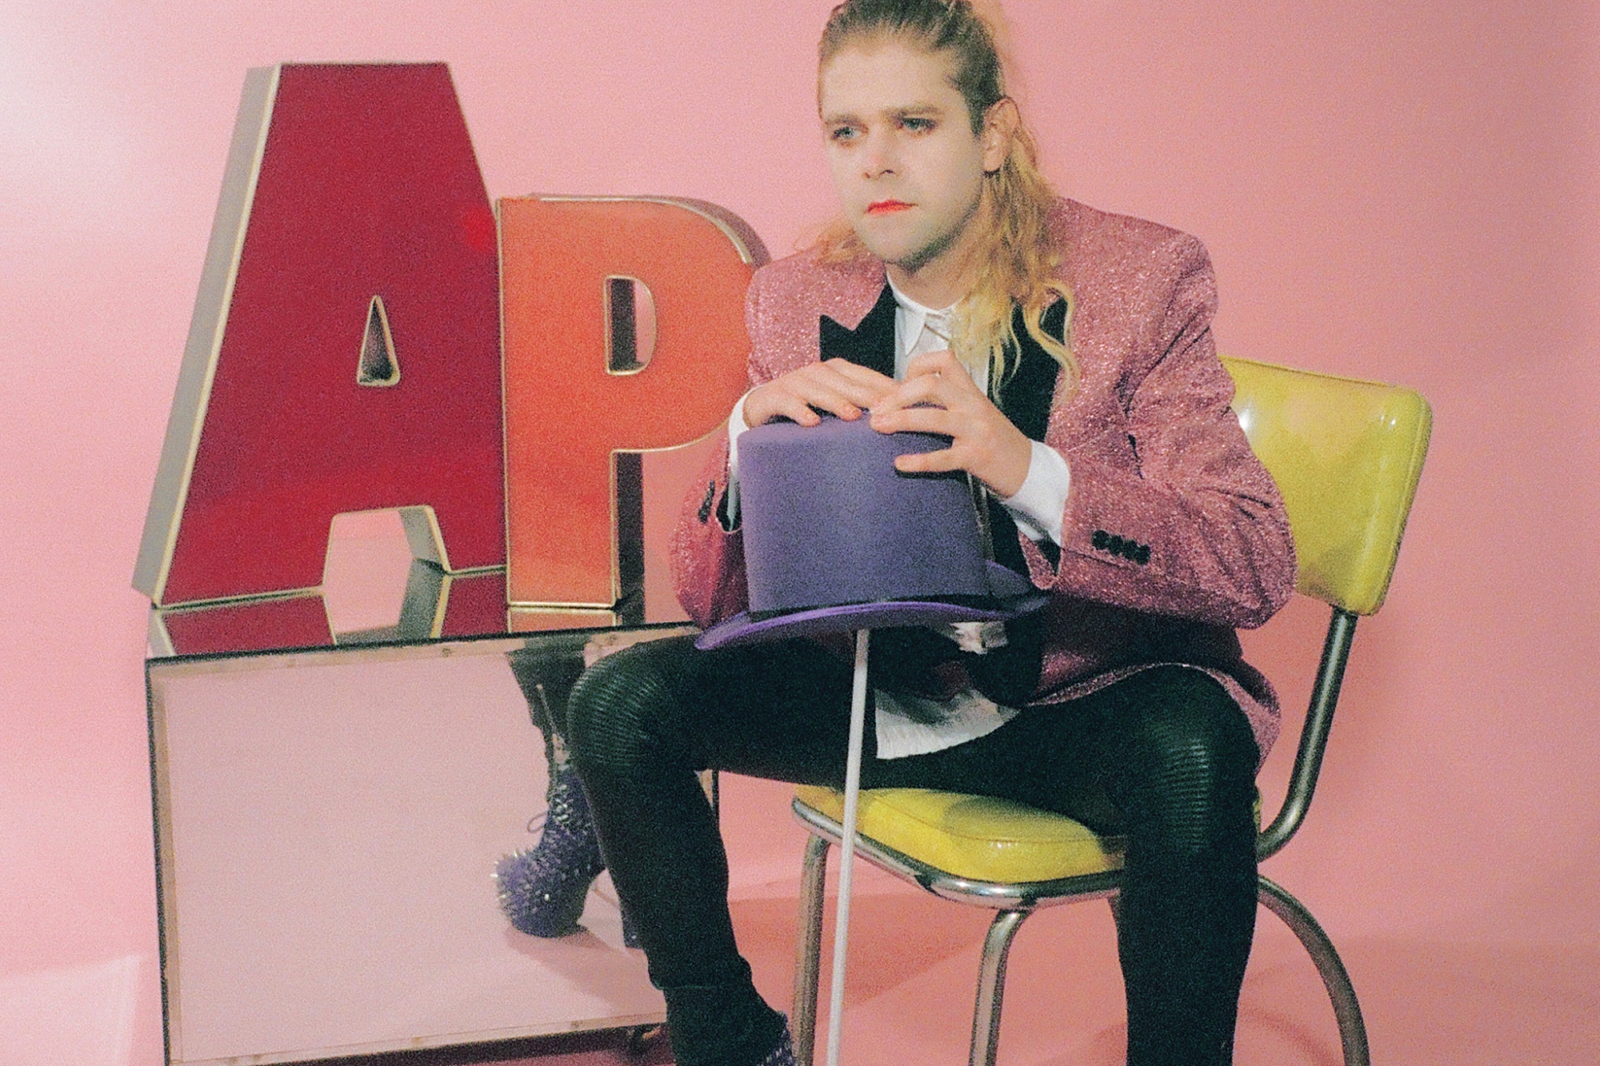 Ariel Pink hangs out in toilets for the ‘I Need a Minute’ video